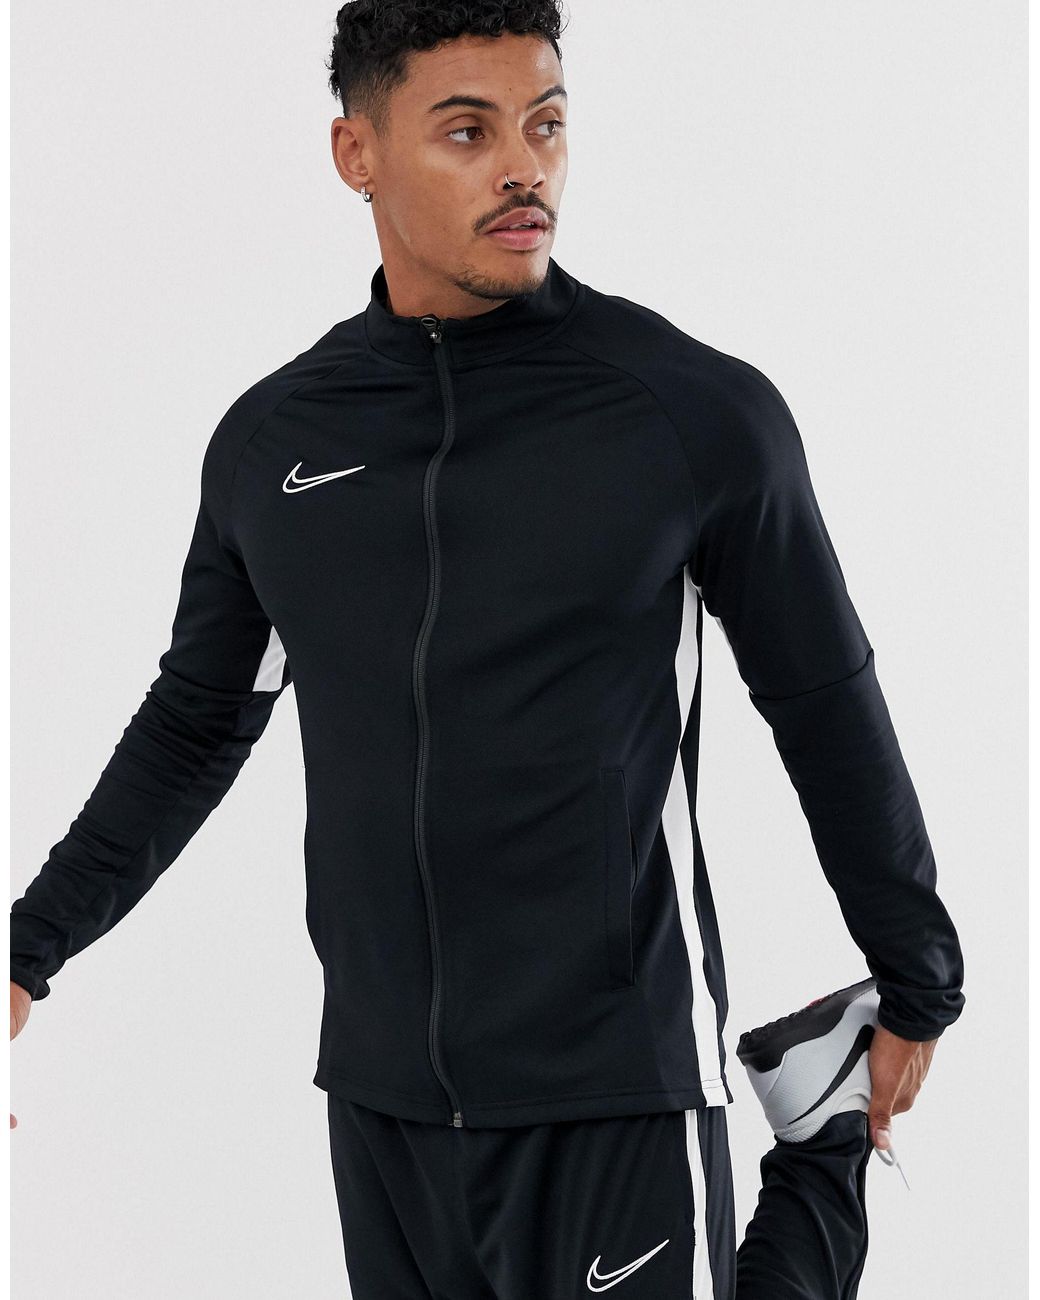 Nike Football Synthetic Academy Tracksuit in Black for Men - Lyst